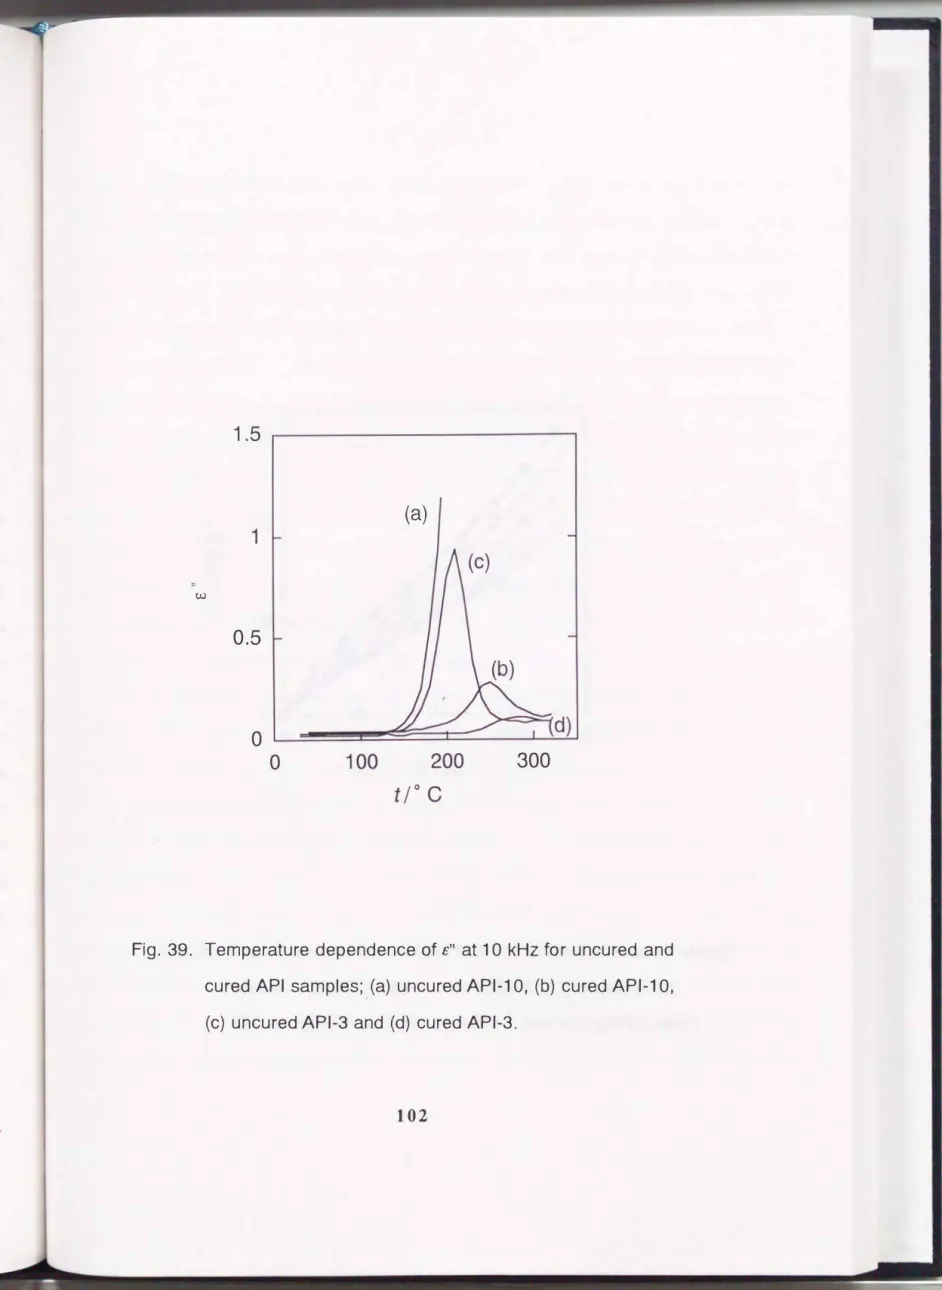 Fig.  39.  Temperature dependence of£&#34;  at  1 0  kHz  for uncured and  cured  API  samples;  (a)  uncured  API-1  0,  (b)  cured  API-1  0,  (c)  uncured  API-3  and (d)  cured  API-3